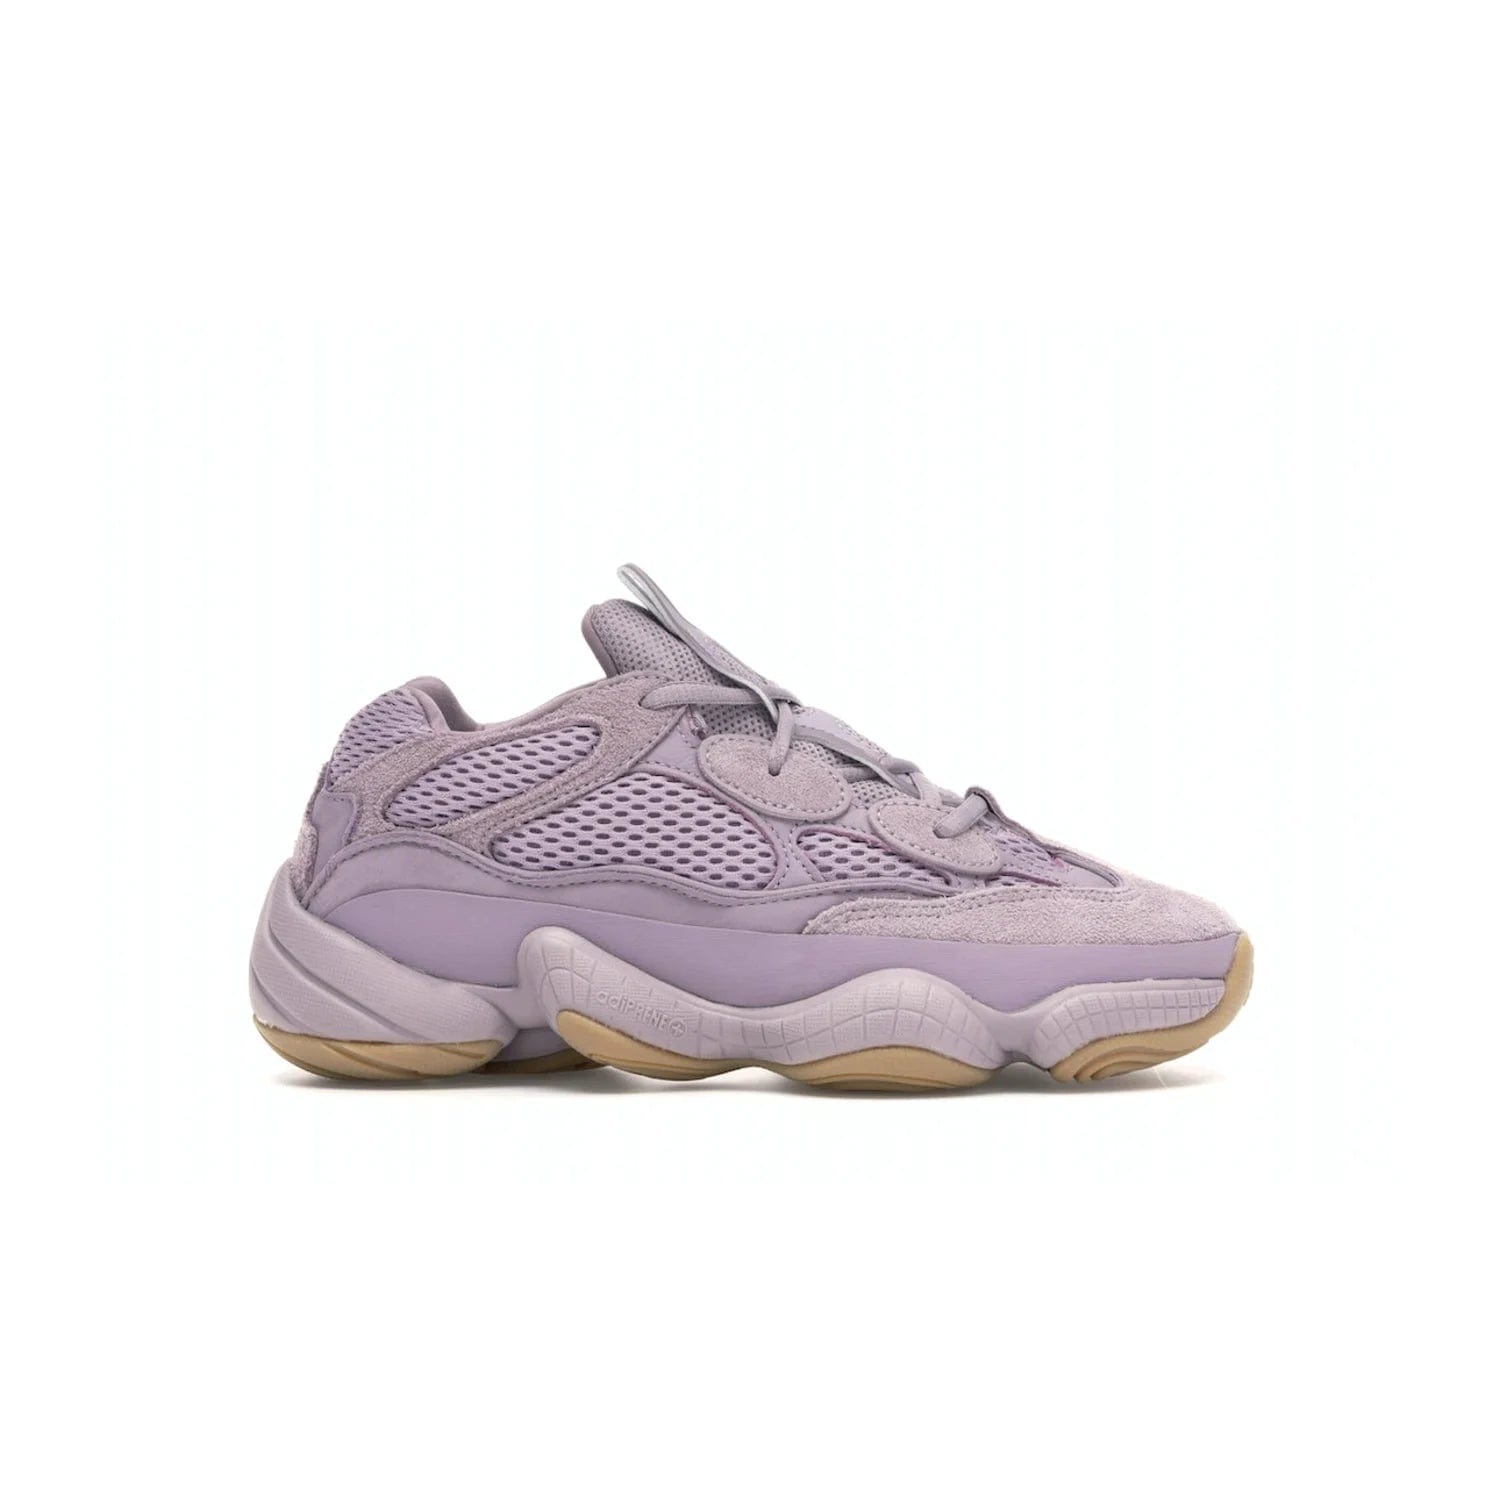 adidas Yeezy 500 Soft Vision - Image 1 - Only at www.BallersClubKickz.com - New adidas Yeezy 500 Soft Vision sneaker featuring a combination of mesh, leather, and suede in a classic Soft Vision colorway. Gum rubber outsole ensures durability and traction. An everyday sneaker that stands out from the crowd.